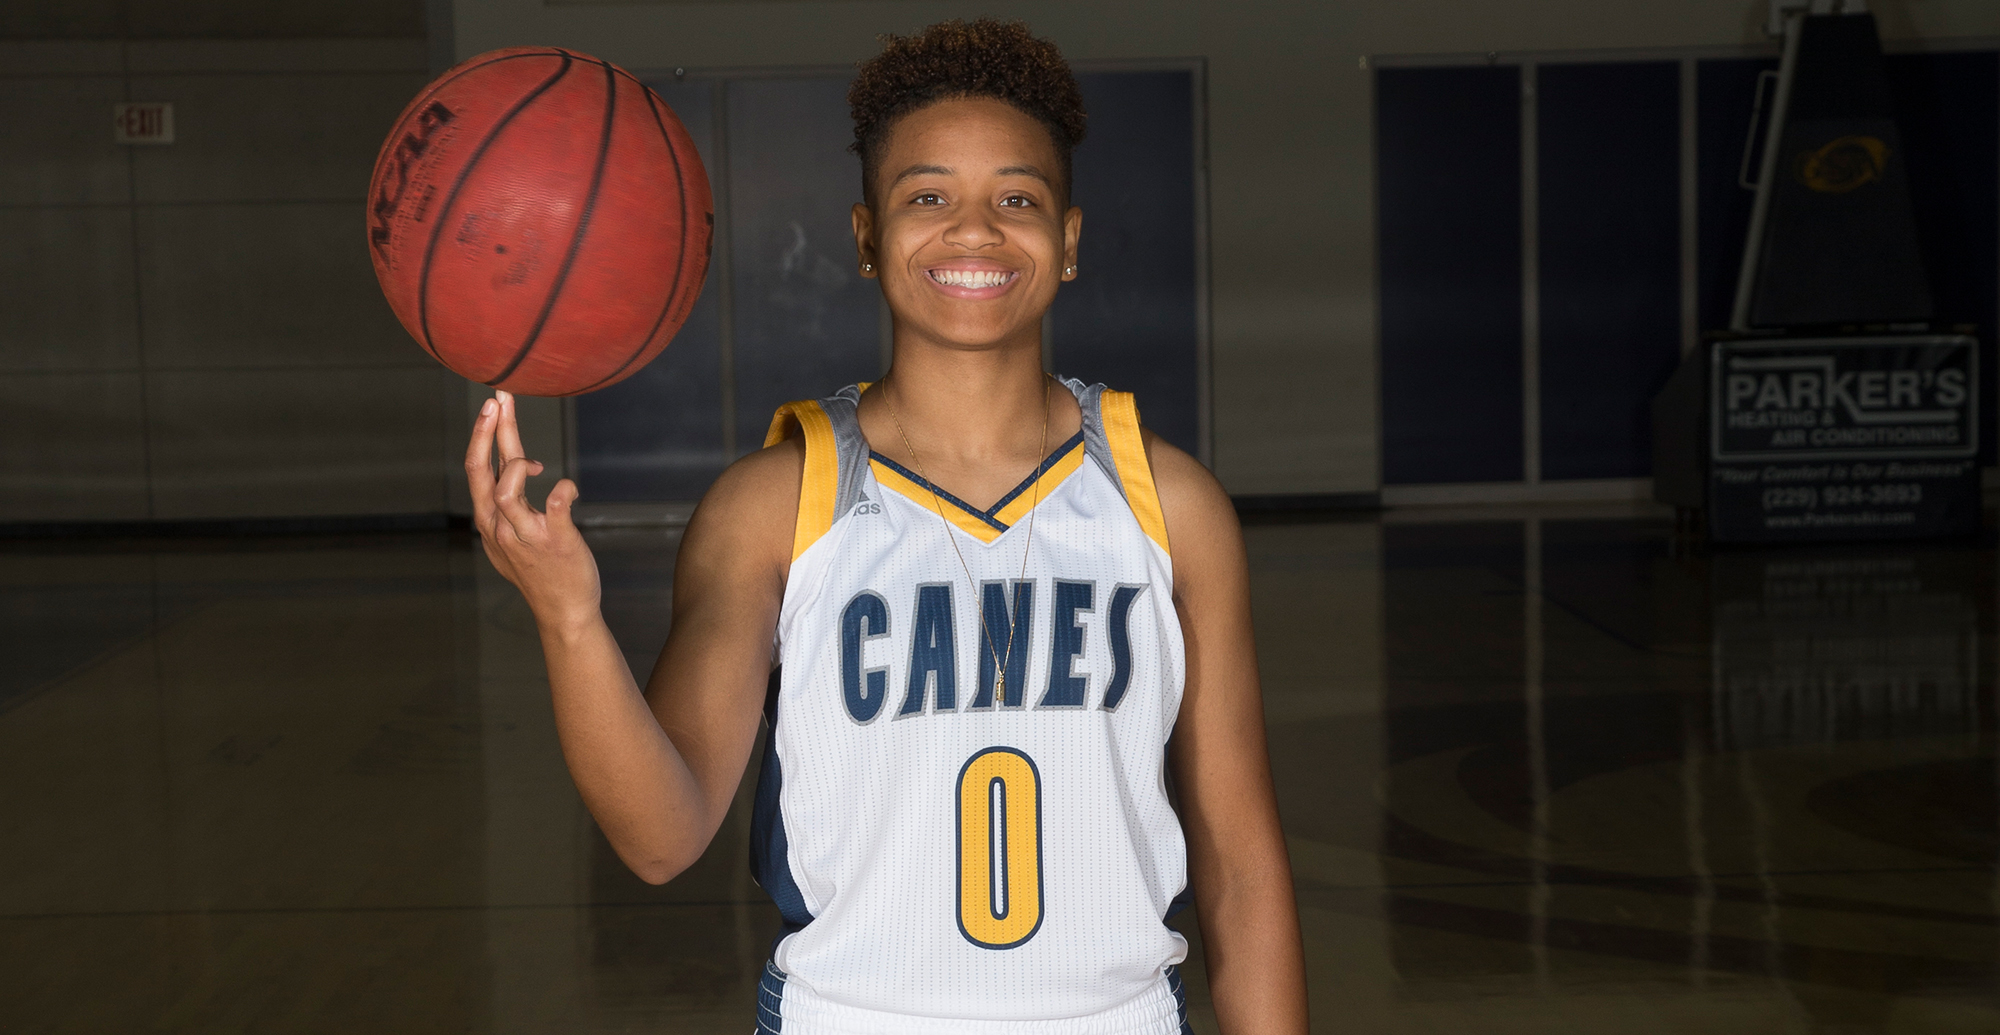 Christmas Comes Early for Lady Canes